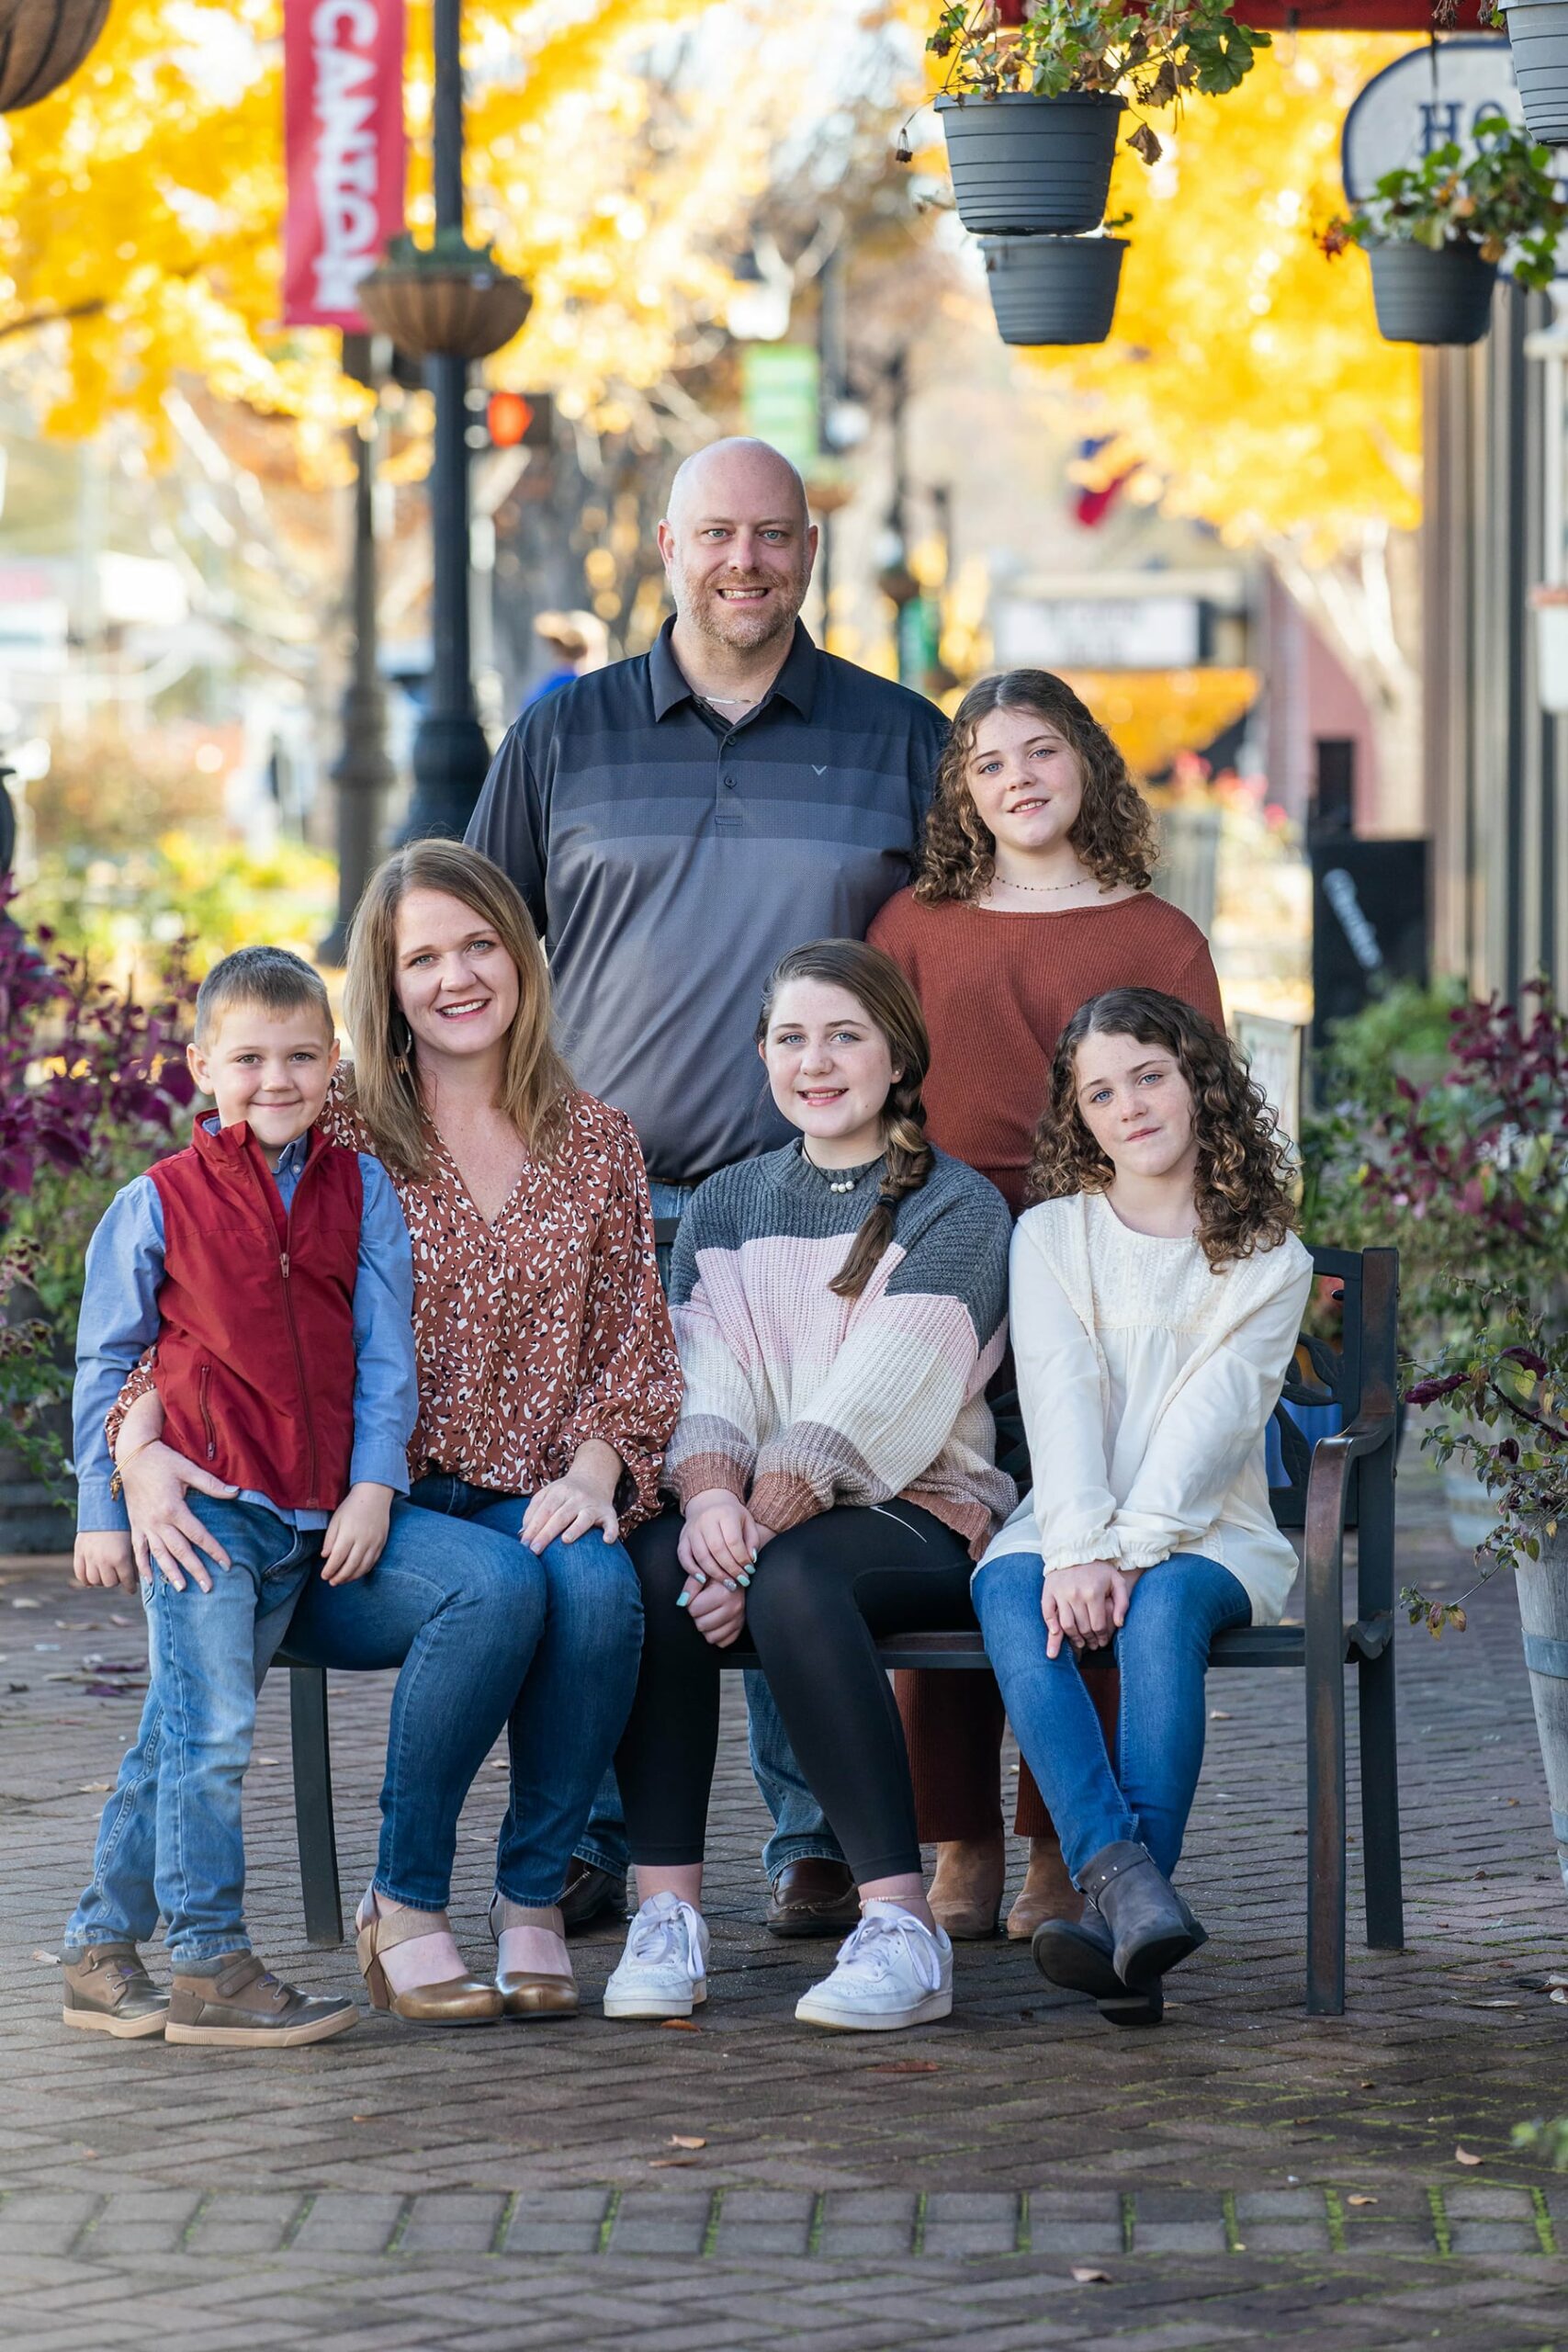 Family of six with the mother and her three kids sitting on a bench and others standing with picturesque downtown street in the background